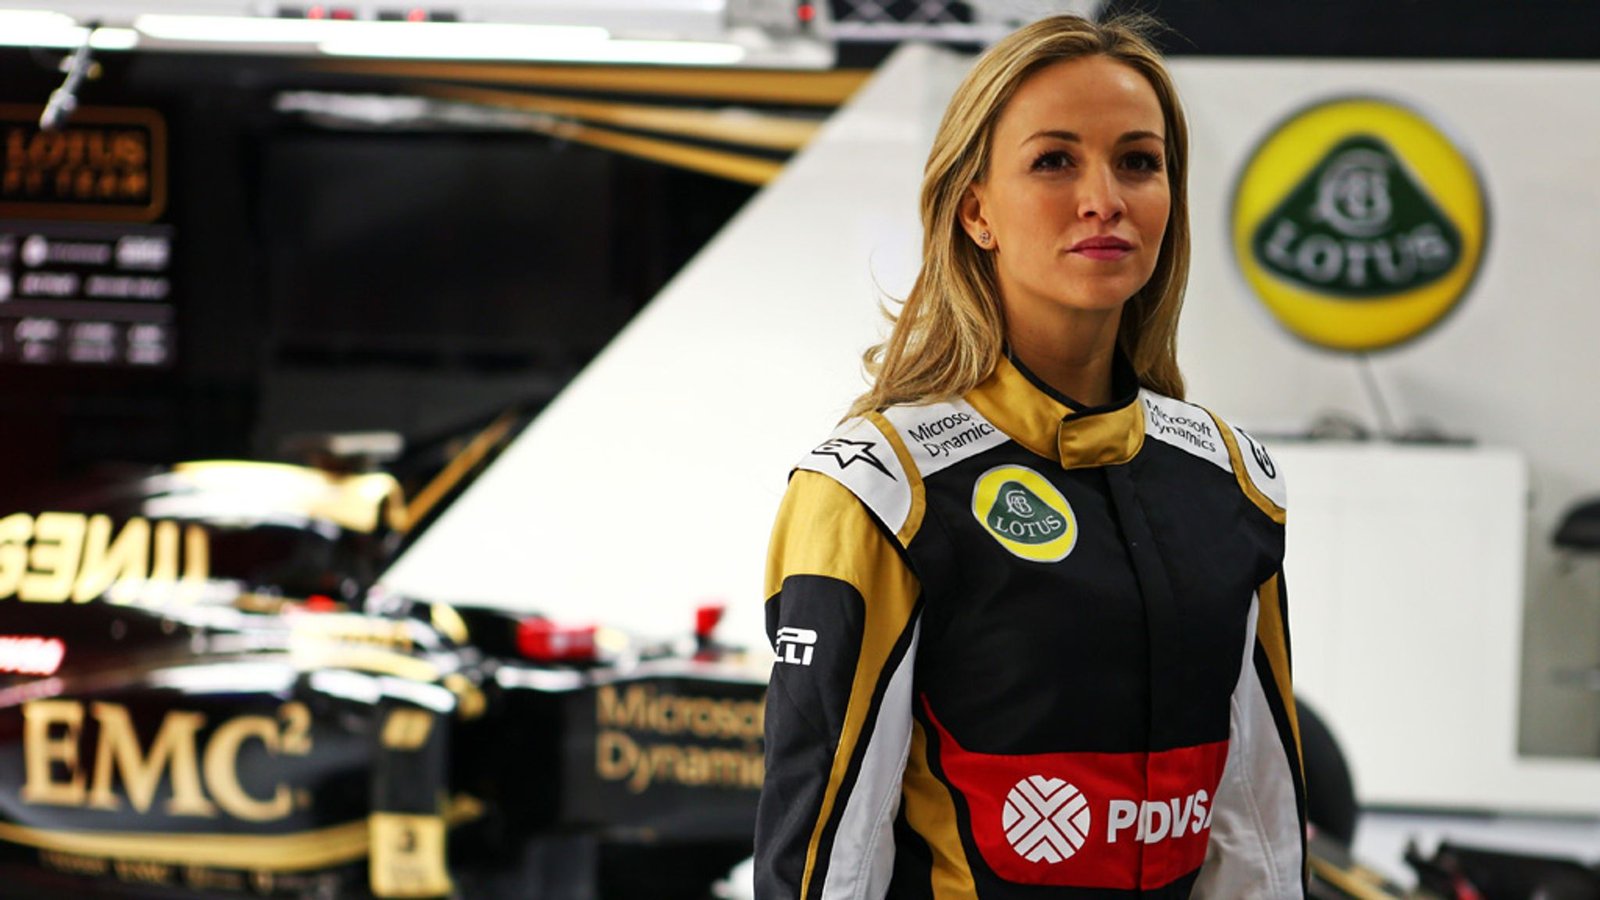 Why are there no female F1 drivers